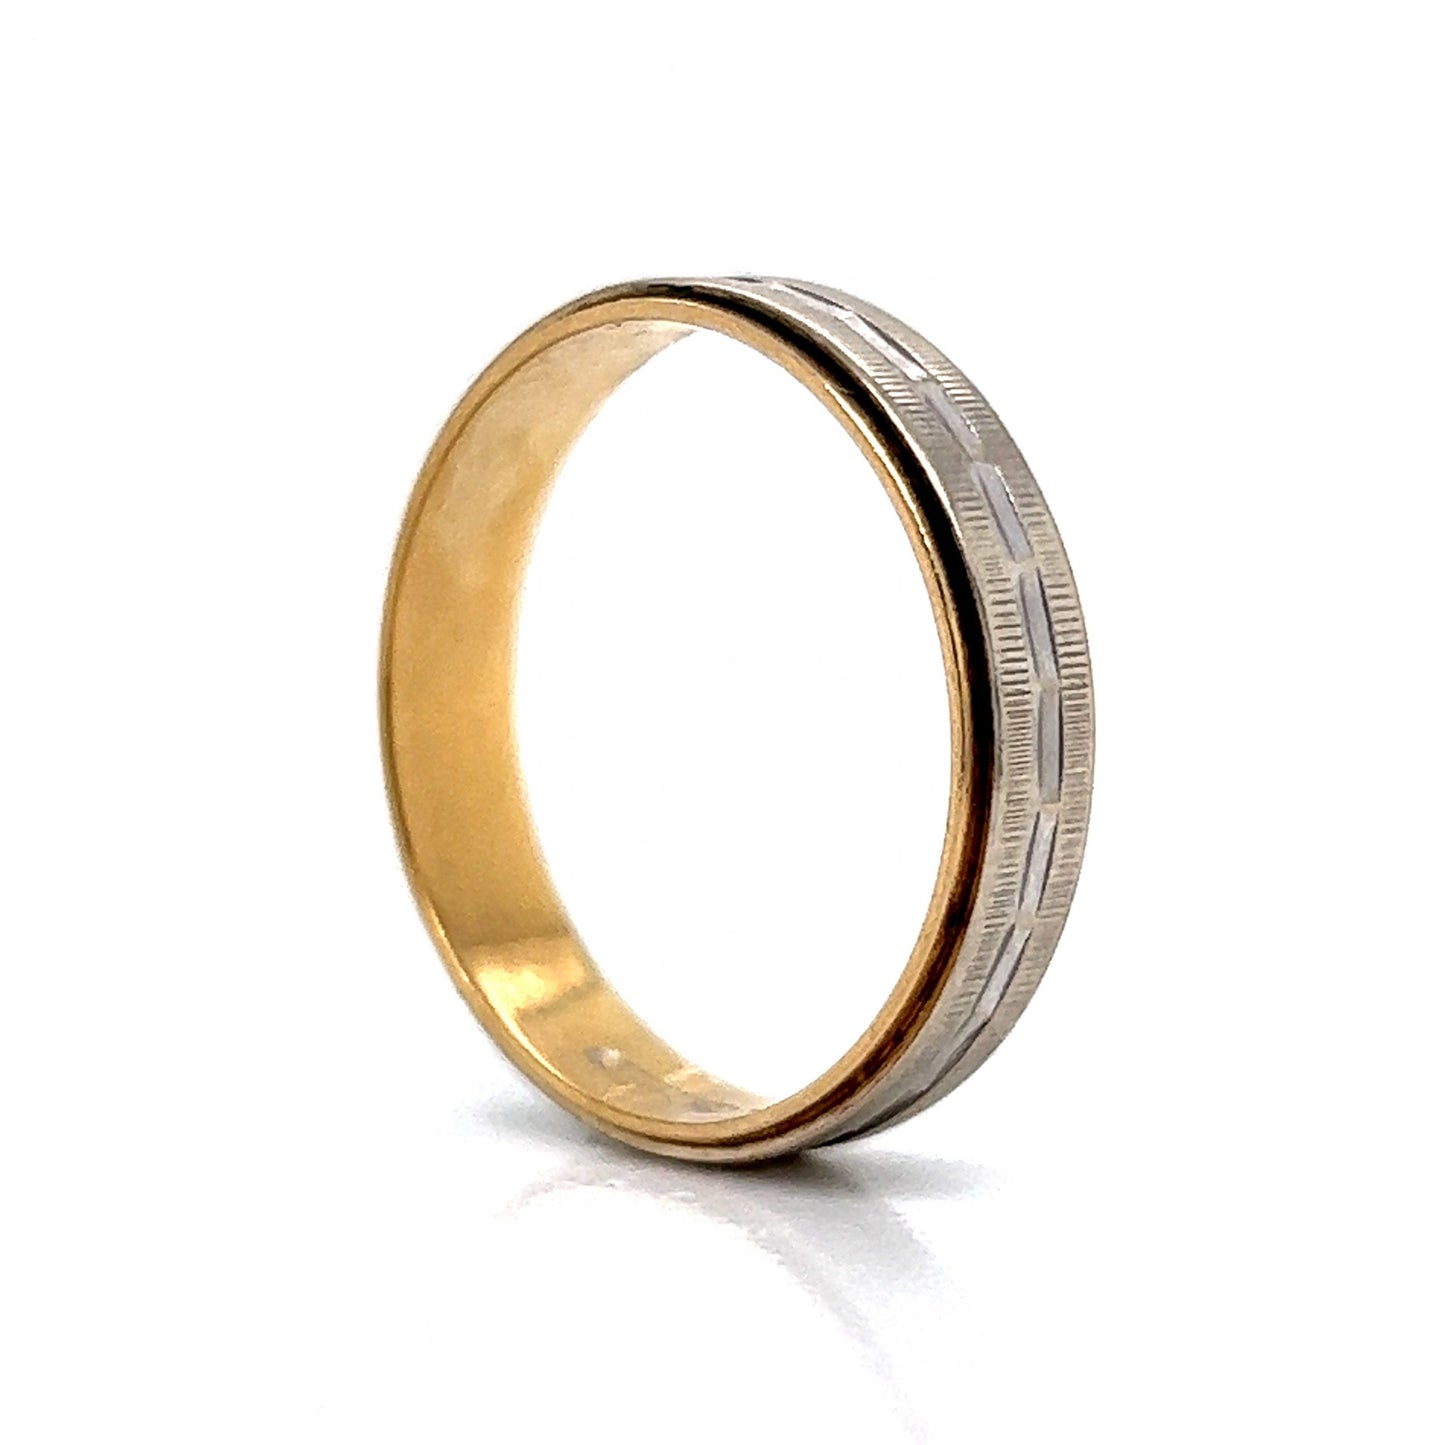 Vintage Men's Two-Tone Textured Wedding Band in 14k Gold